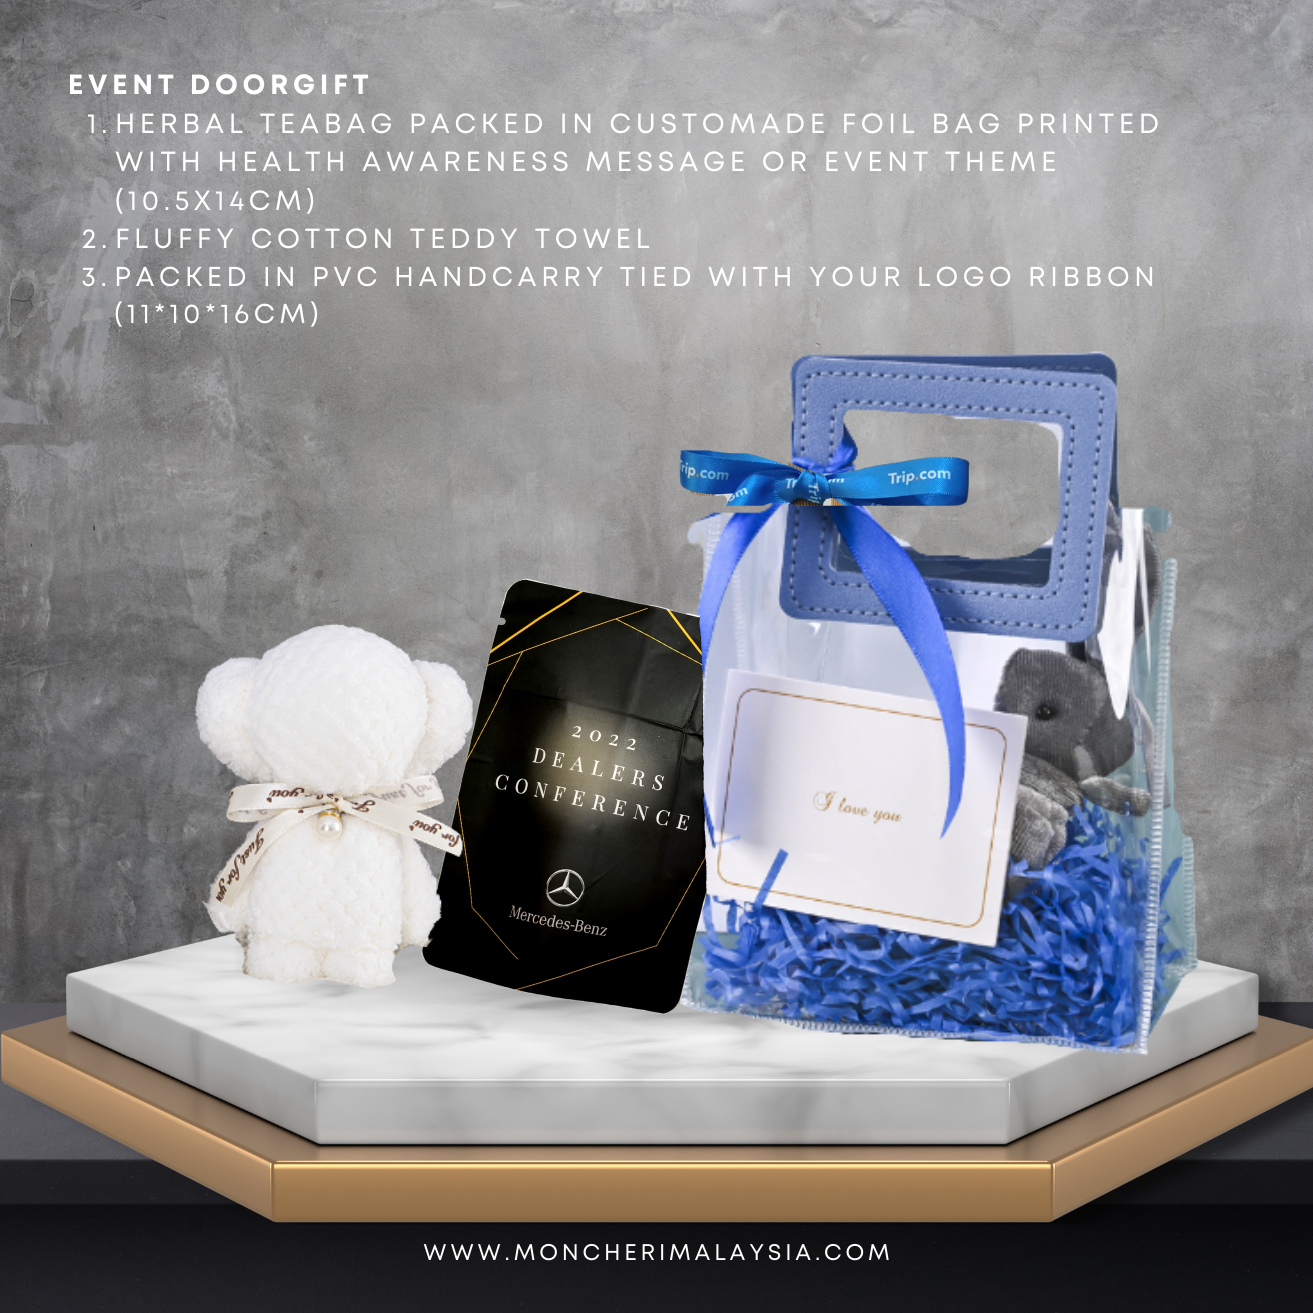 Are you still thinking about what kind of special door gift to give at your  wedding dinner or event? There is no better choice for you th... | Instagram